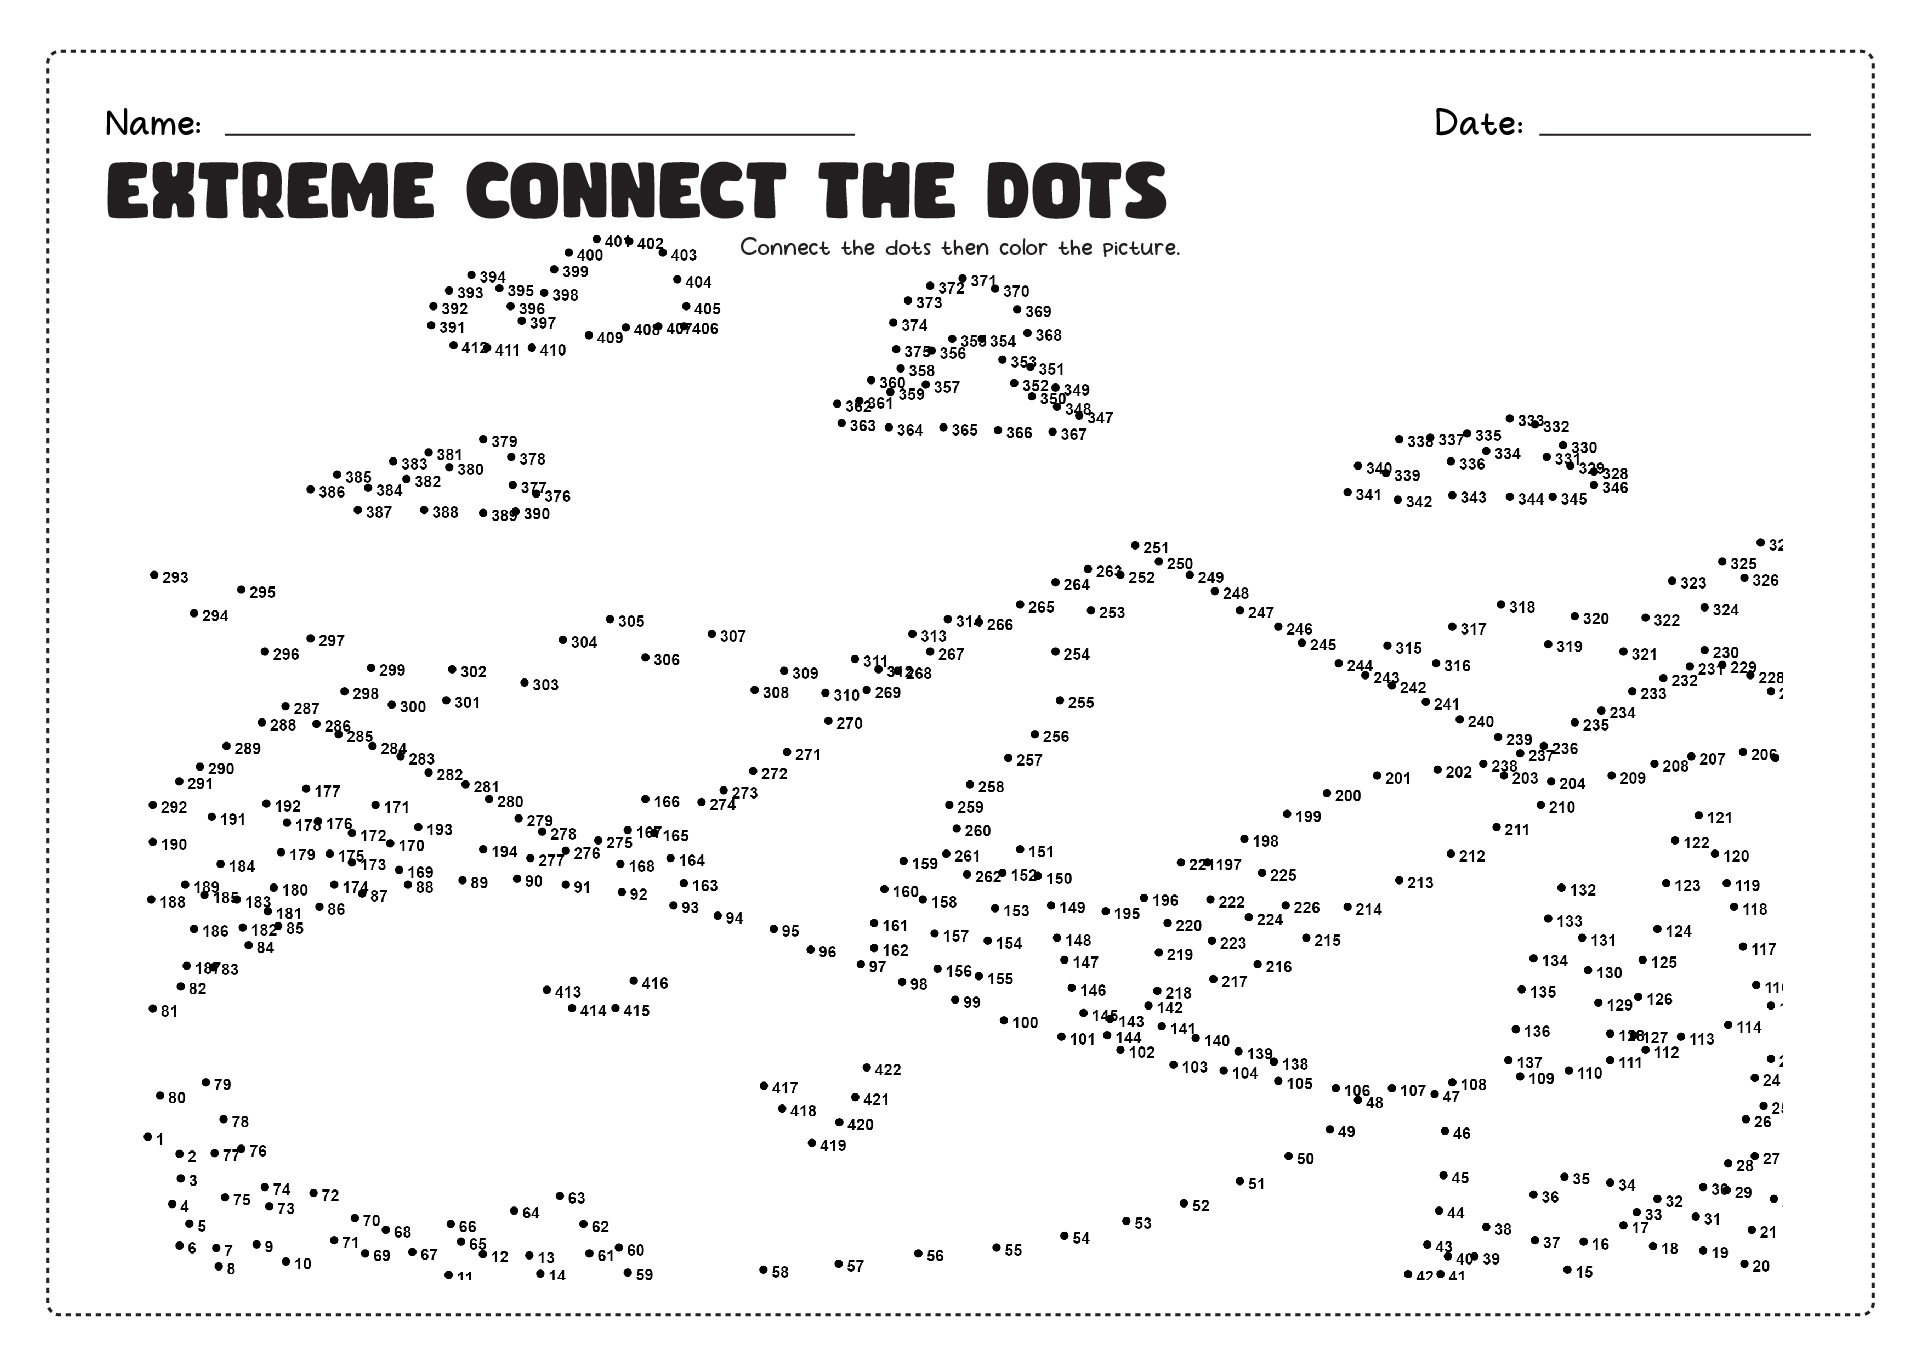 Extreme Connect the Dots Printable